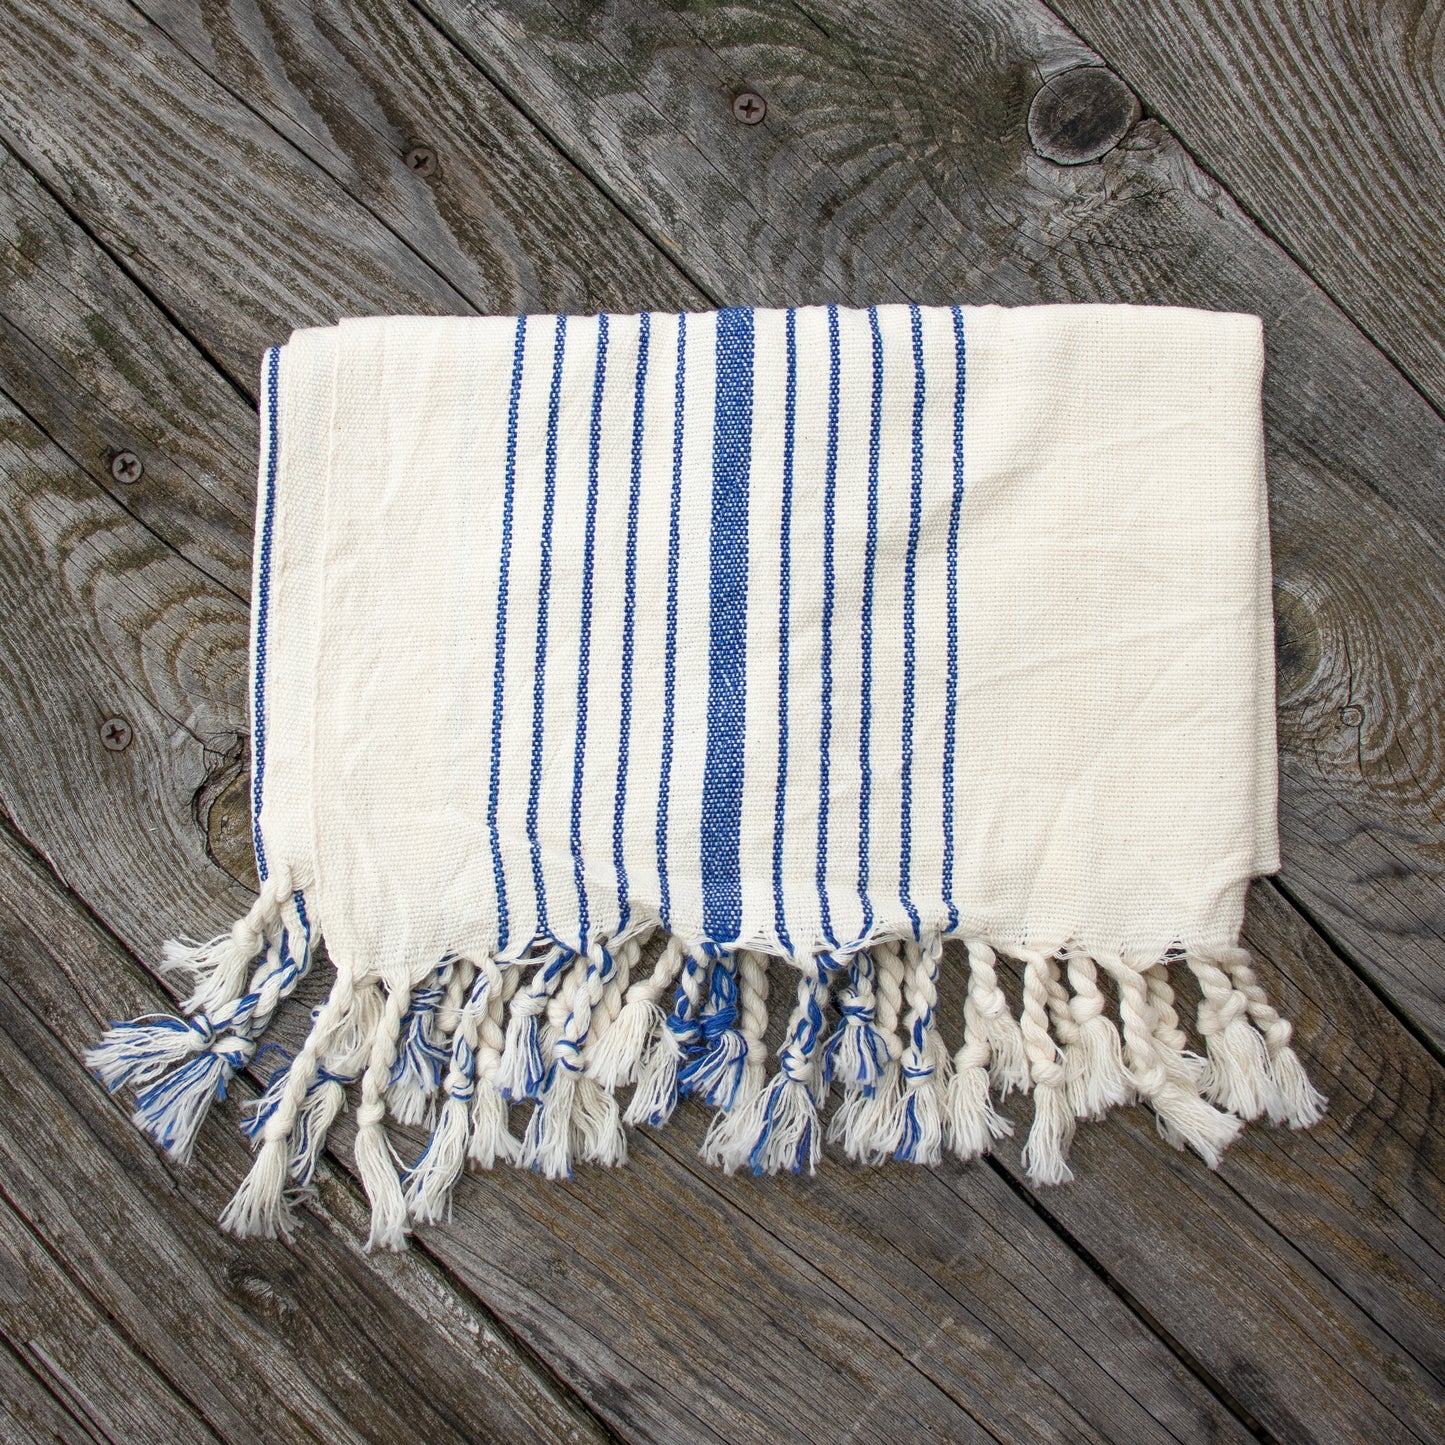 100% premium Turkish cotton hand towels—highly absorbent, lightweight, quick to dry, and perfect for the kitchen or bath. 17 x 25 inches overall hand-loomed and hand-dyed by Turkish artisans for woman-owned Home & Loft of New York.